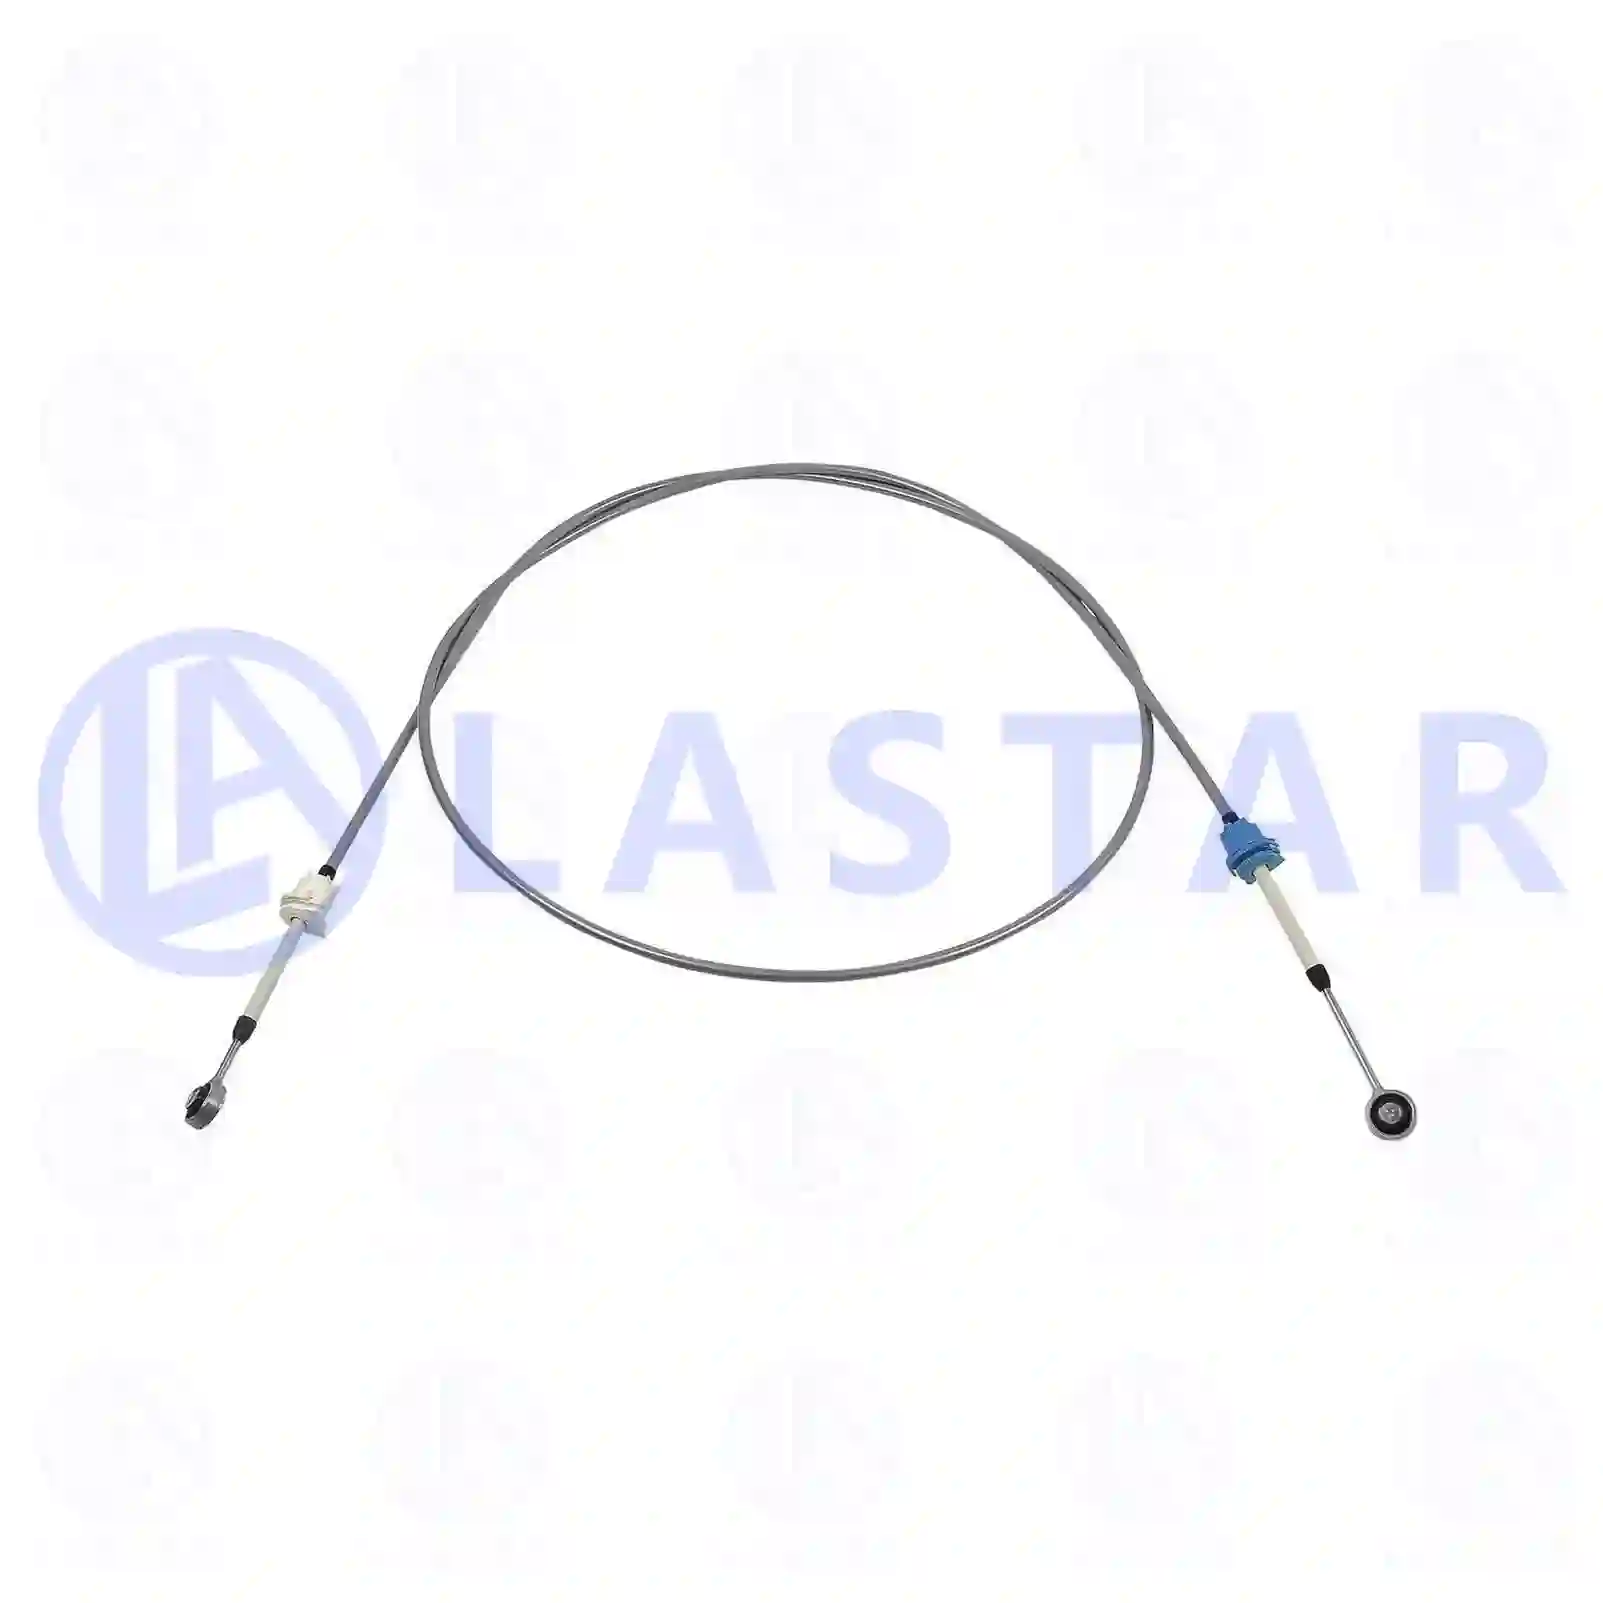 Control cable, switching, 77732682, 20545949, 20702949, 21002849, 21343549, 21789665 ||  77732682 Lastar Spare Part | Truck Spare Parts, Auotomotive Spare Parts Control cable, switching, 77732682, 20545949, 20702949, 21002849, 21343549, 21789665 ||  77732682 Lastar Spare Part | Truck Spare Parts, Auotomotive Spare Parts